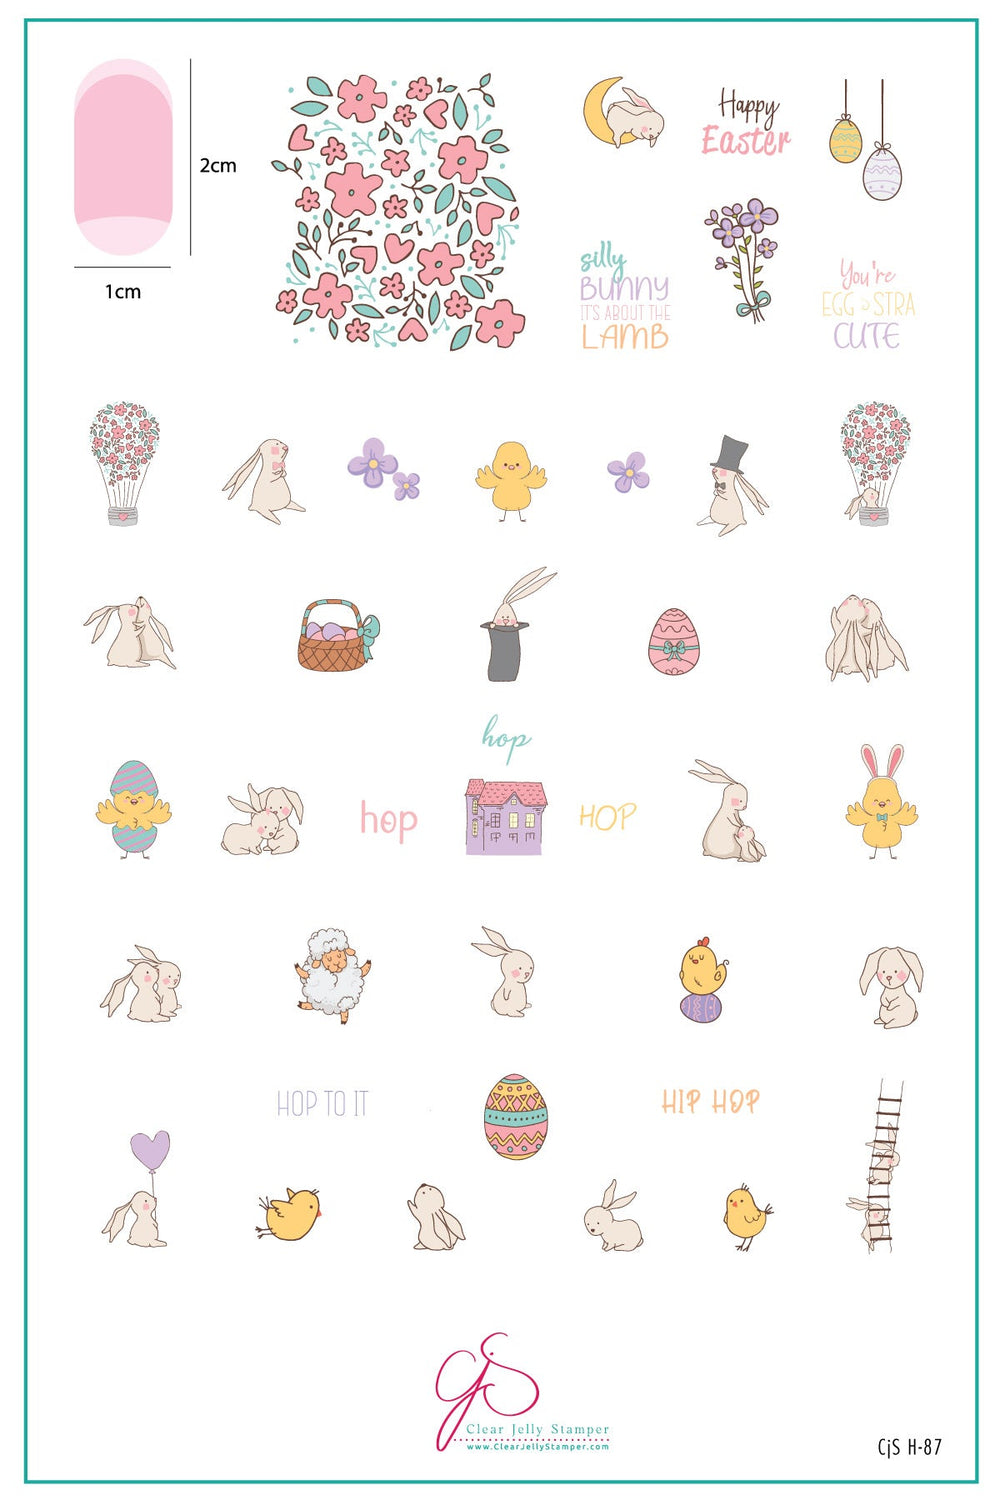 CJSH-87 - Silly Bunny | Clear Jelly Stamping Plate